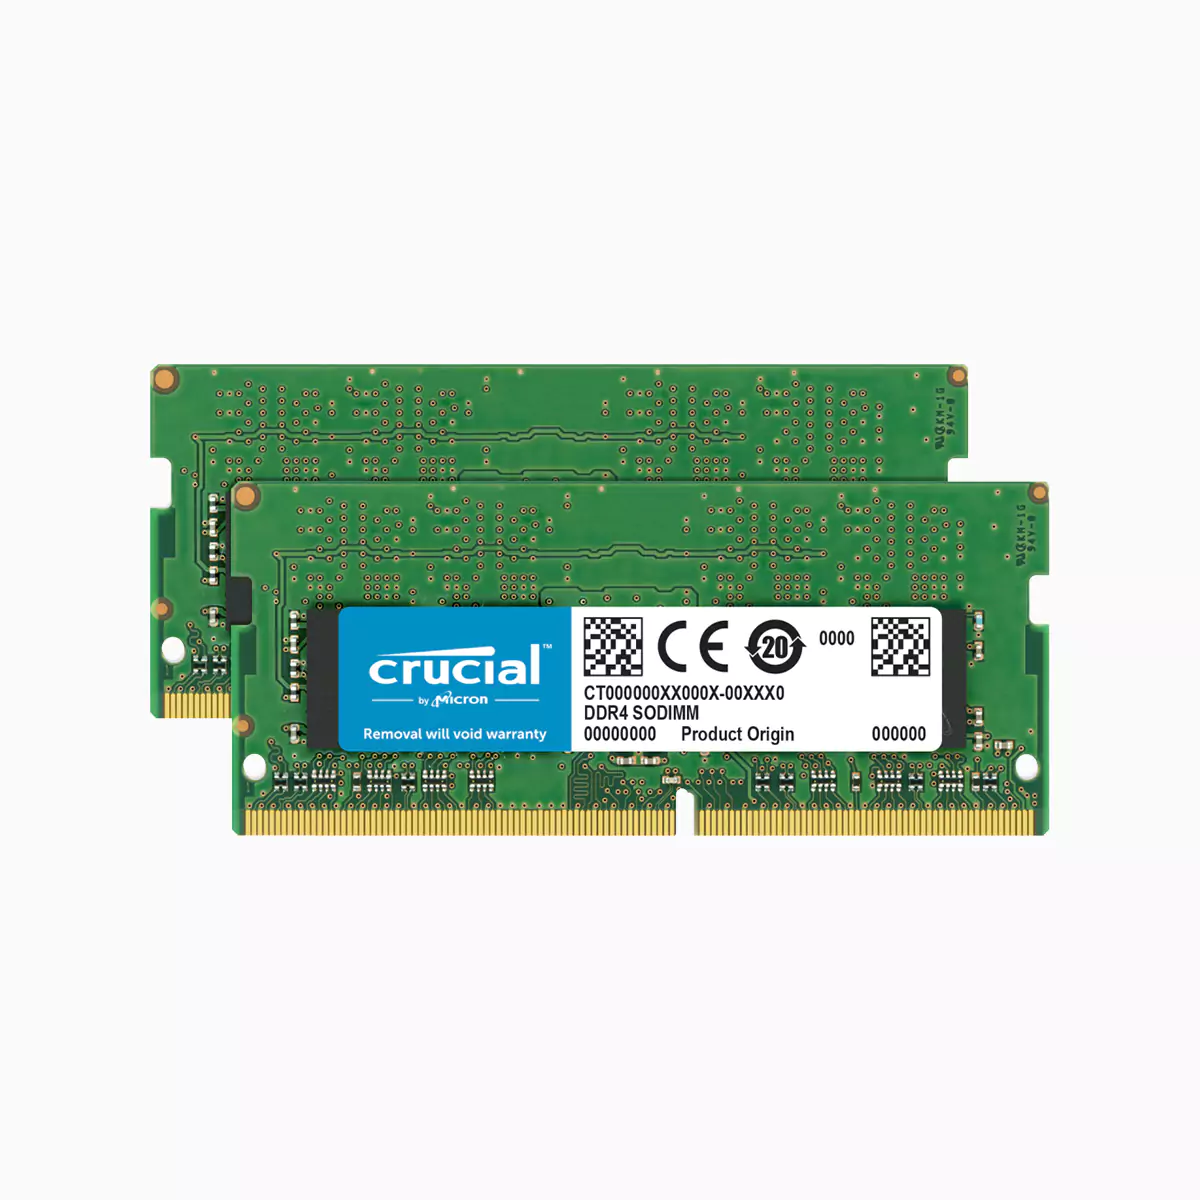 Memory Size: 16GB Voltage: 1.2V Latency Timing CL22 Speed: 3200MHz 1 x 16GB DIMM Memory